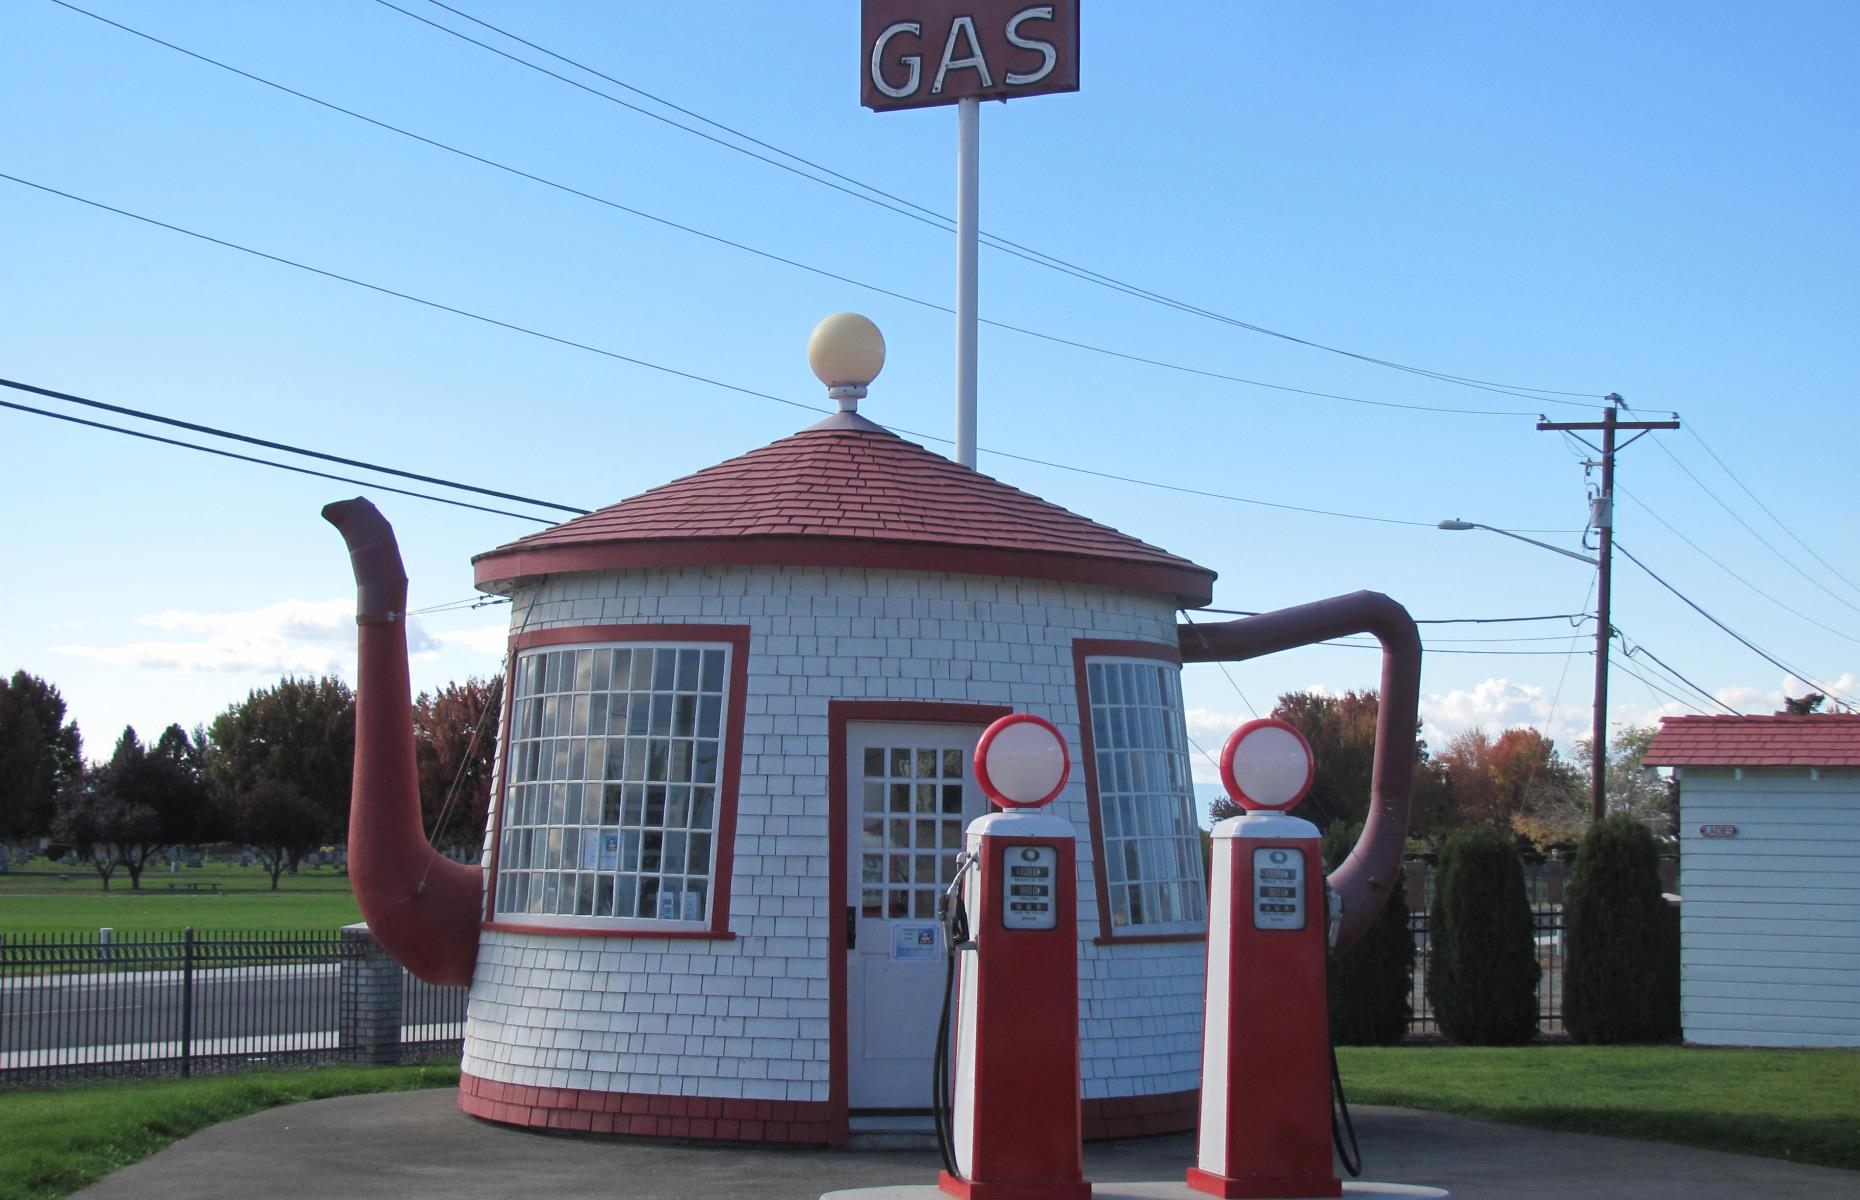 <p>This cute little gas station in Washington isn’t just a perfect example of 1920s novelty architecture, it’s also a joking reference to <a href="https://npgallery.nps.gov/NRHP/GetAsset/4d2ee737-fd0d-4190-8b8e-9c5f57902181">a long-forgotten scandal</a> involving a disgraced politician and an oil field called Teapot Dome. It’s no longer a functional service station, but it's the pride and joy of the town of Zillah, which now owns the refurbished building.  </p>